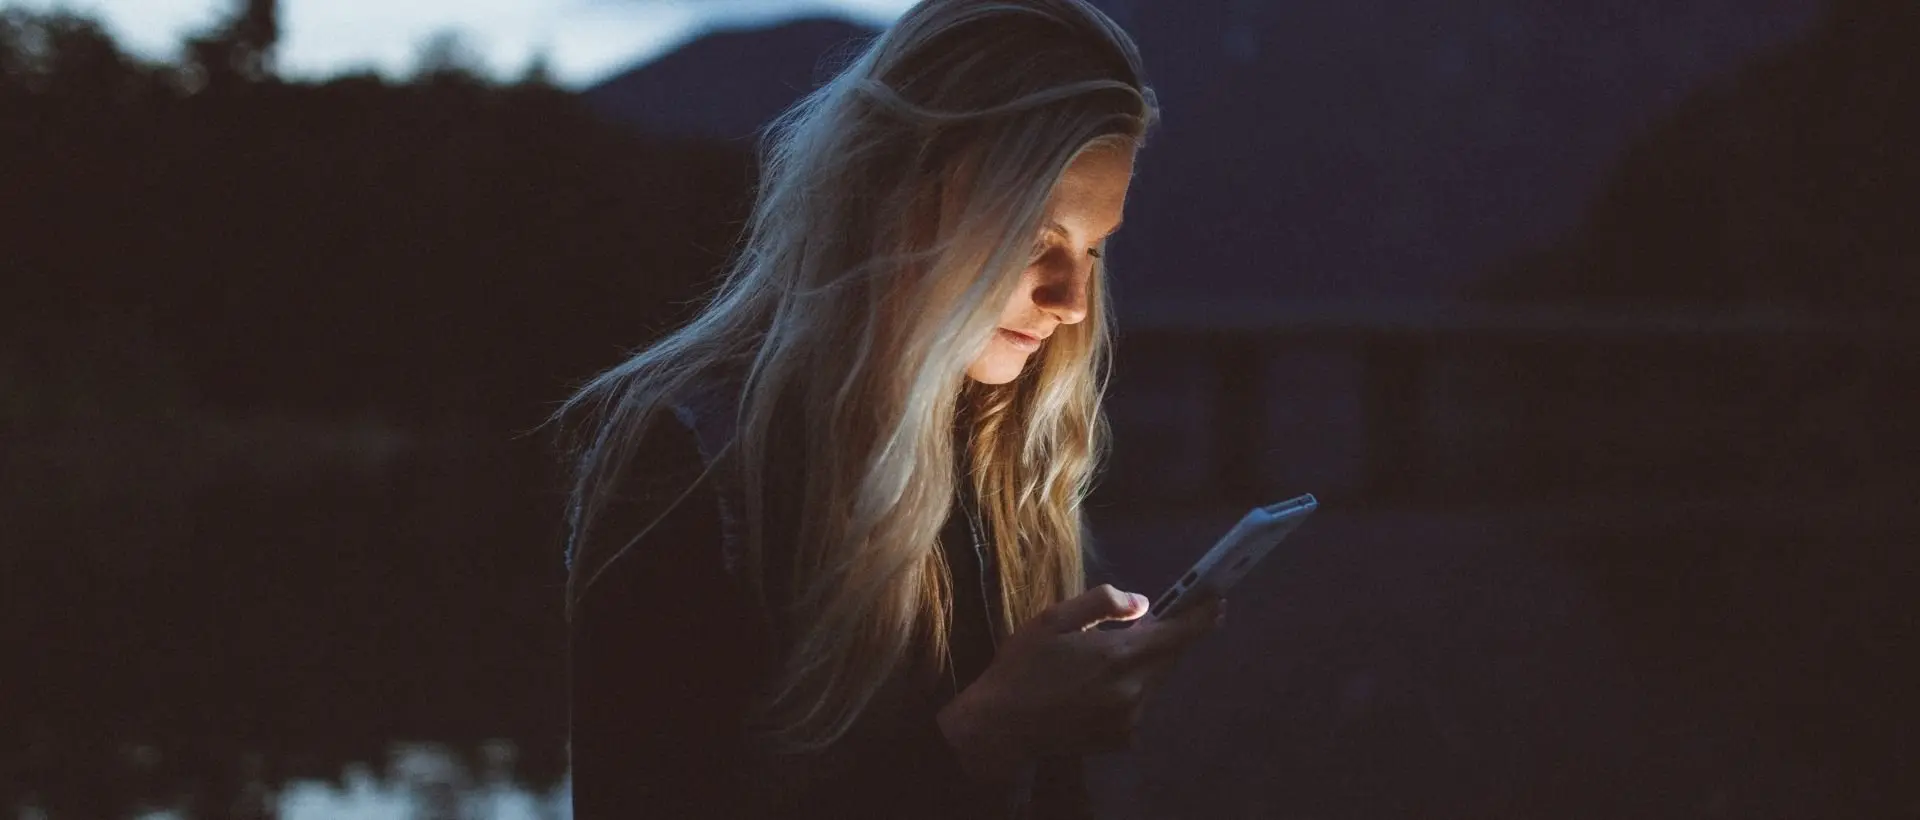 a woman looking at her cell phone in the dark.